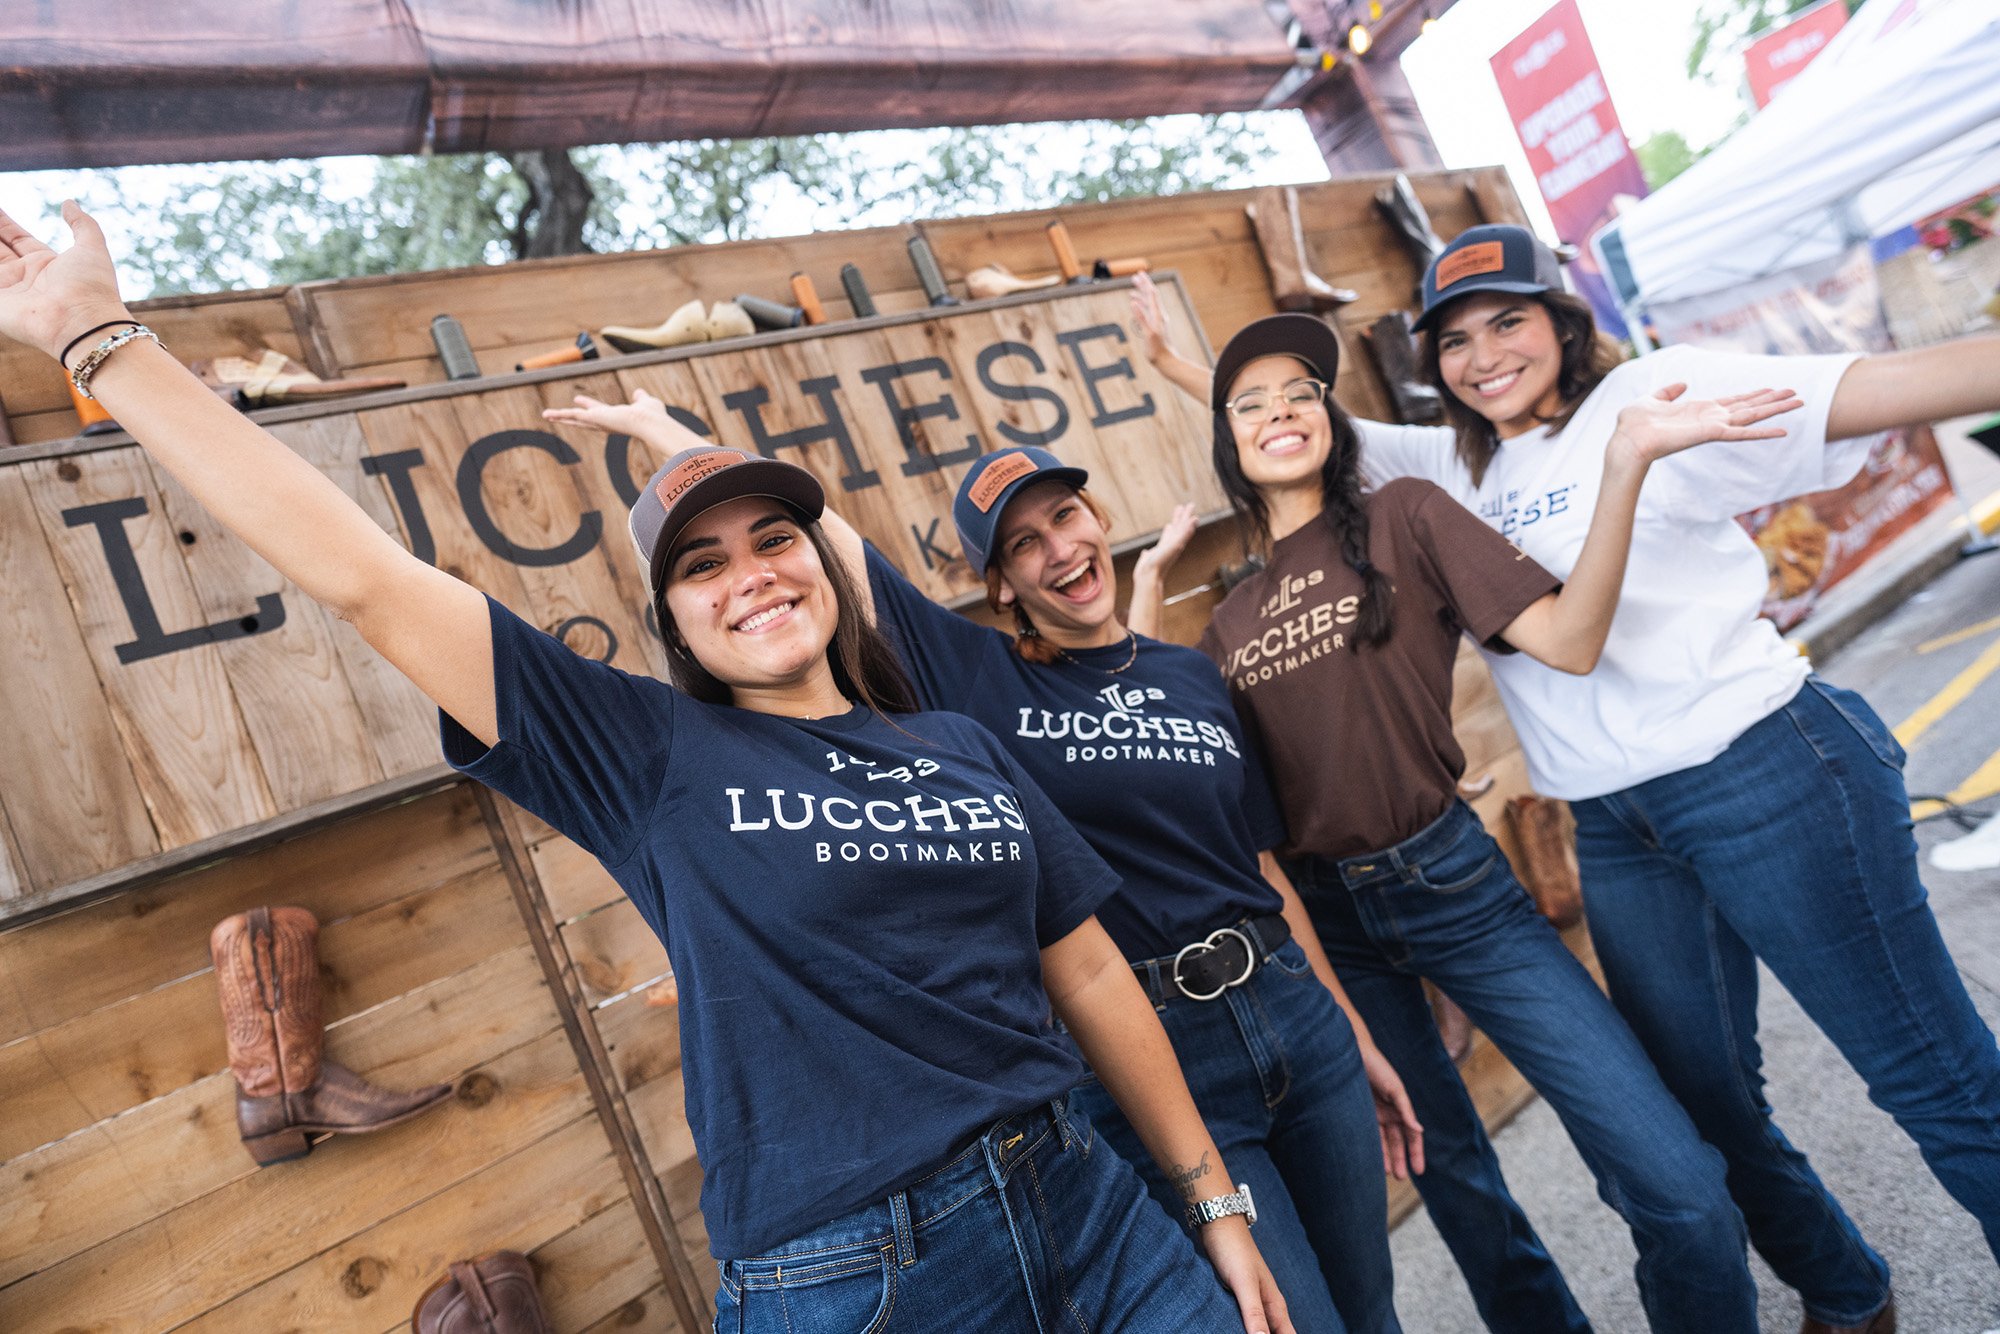 Event staffing and brand activation support for Lucchese